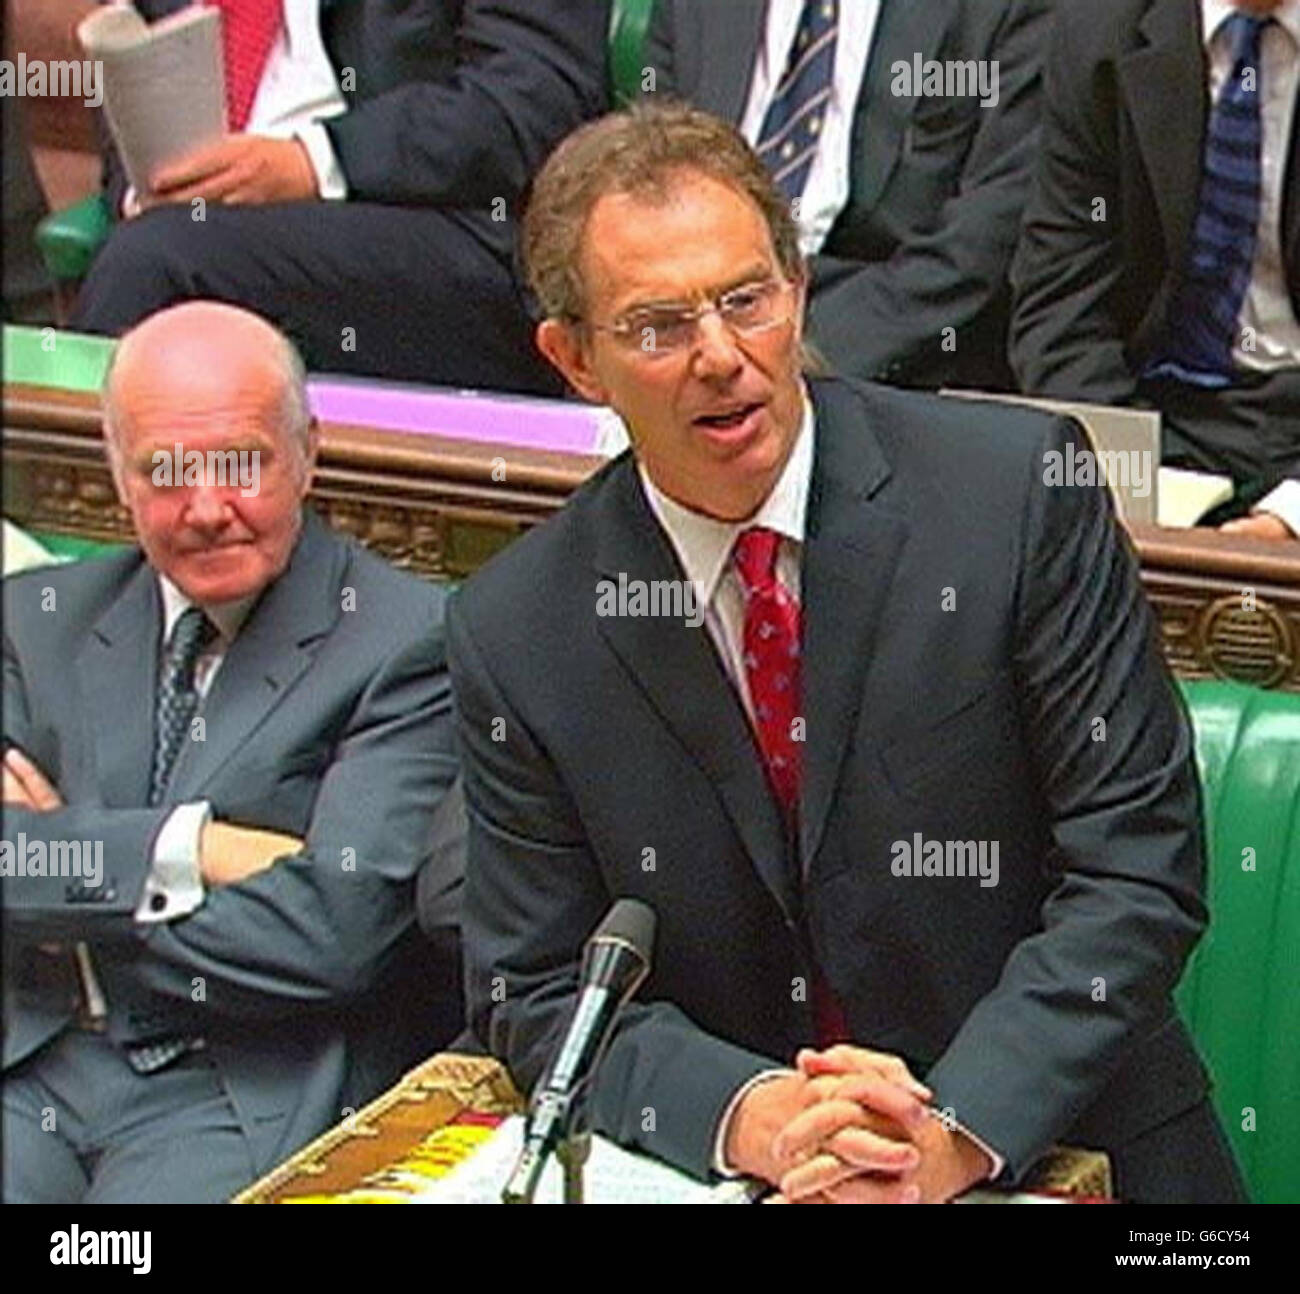 Leader of the House John Reid watches as Britain's Prime Minister Tony Blair answers a question in the House of Commons during his regular weekly session of questions from members of parliament. * Amongst other matters, he was expected to be quizzed over allegations that the Government exaggerated the threat of Iraq's weapons of mass destruction. Stock Photo